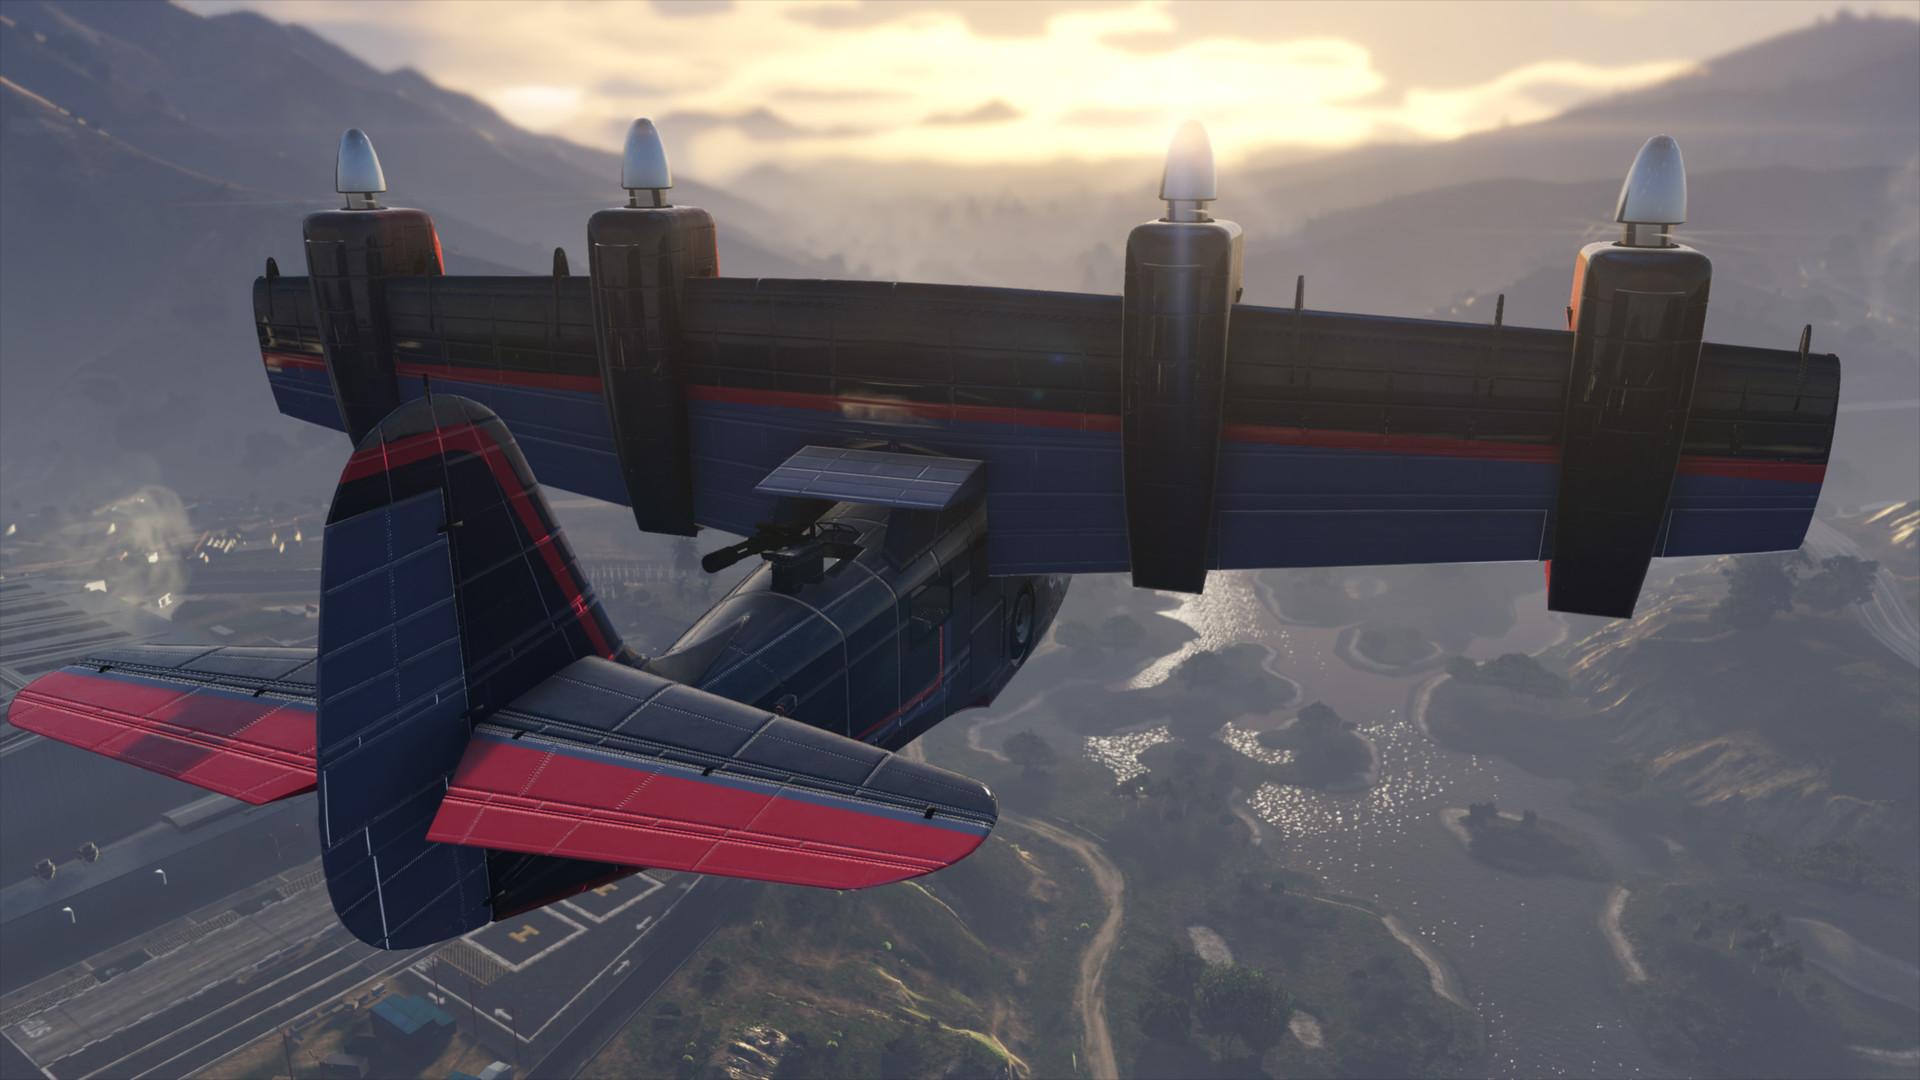 Screenshot №18 from game Grand Theft Auto V